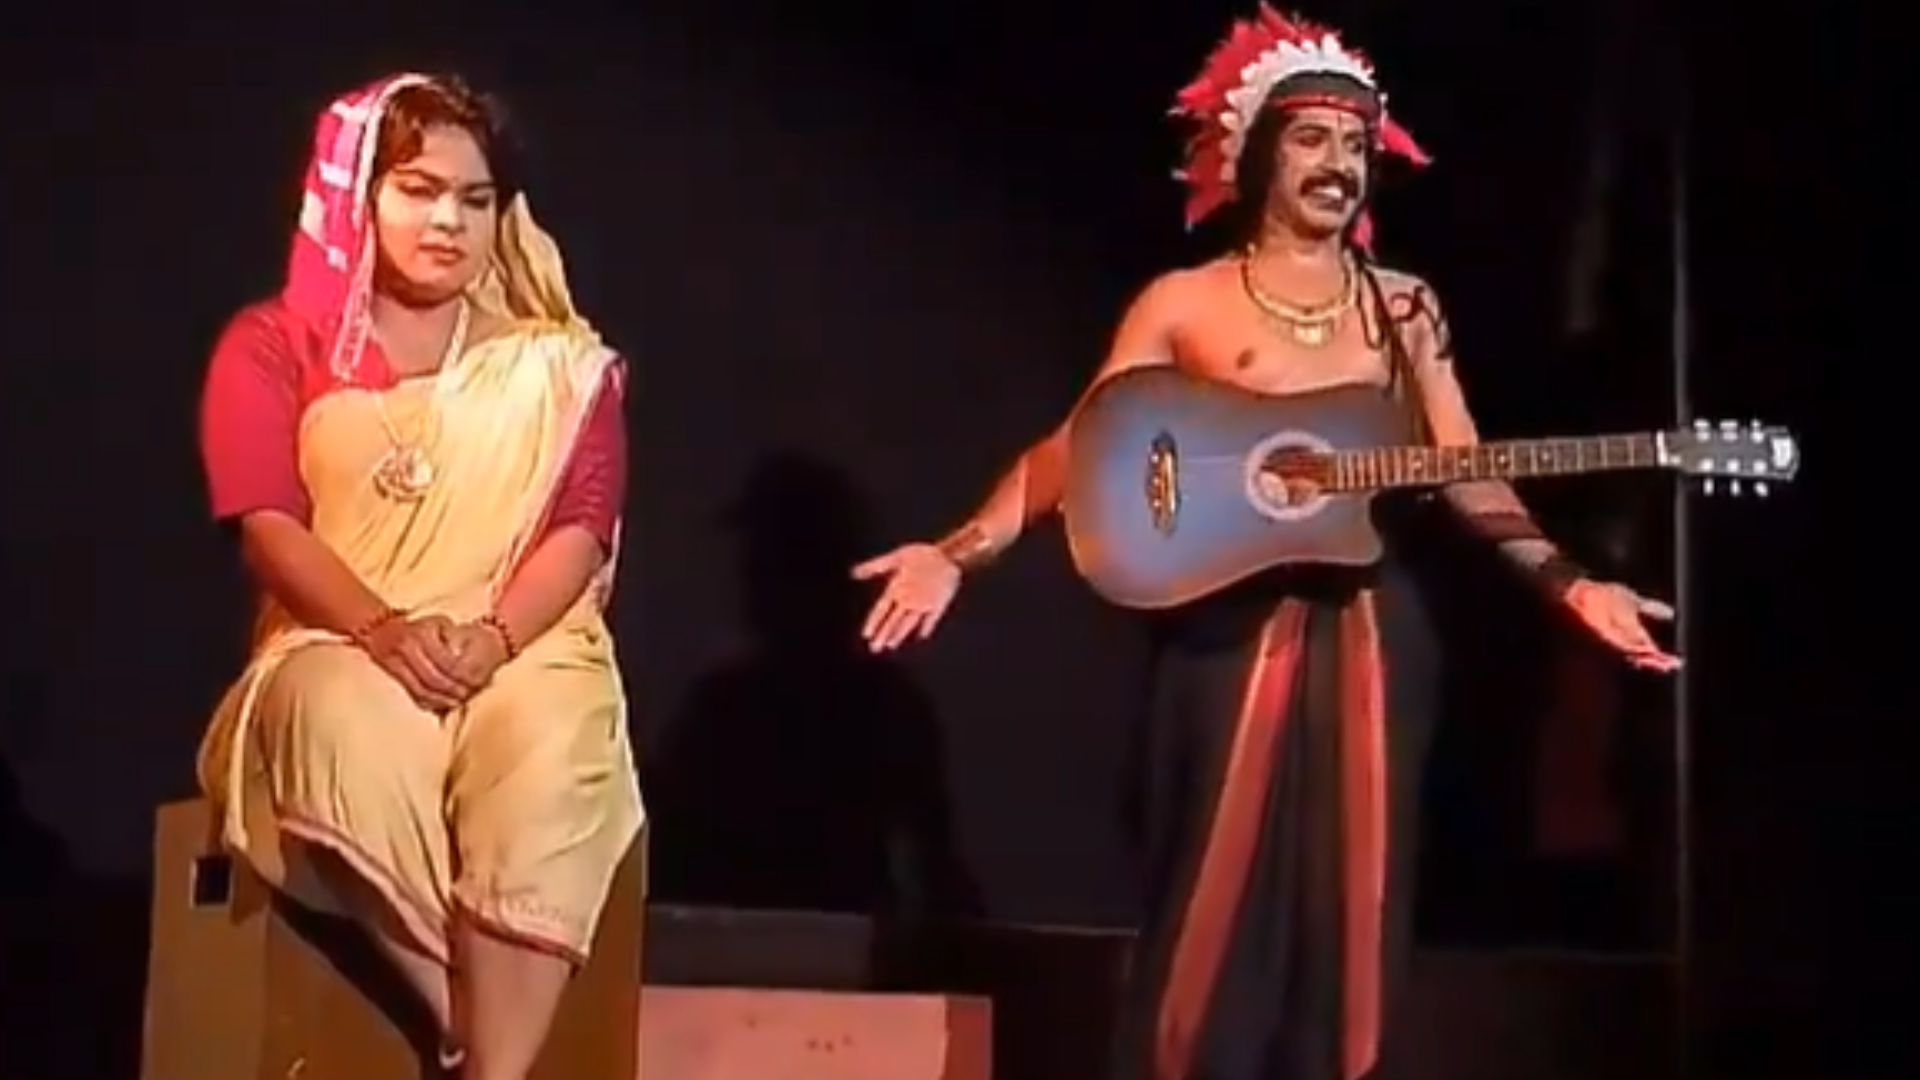 Sita Offering Ravana Beef And Dancing With Him At A Pondicherry University Play Sparks Outrage- Watch Video Here!